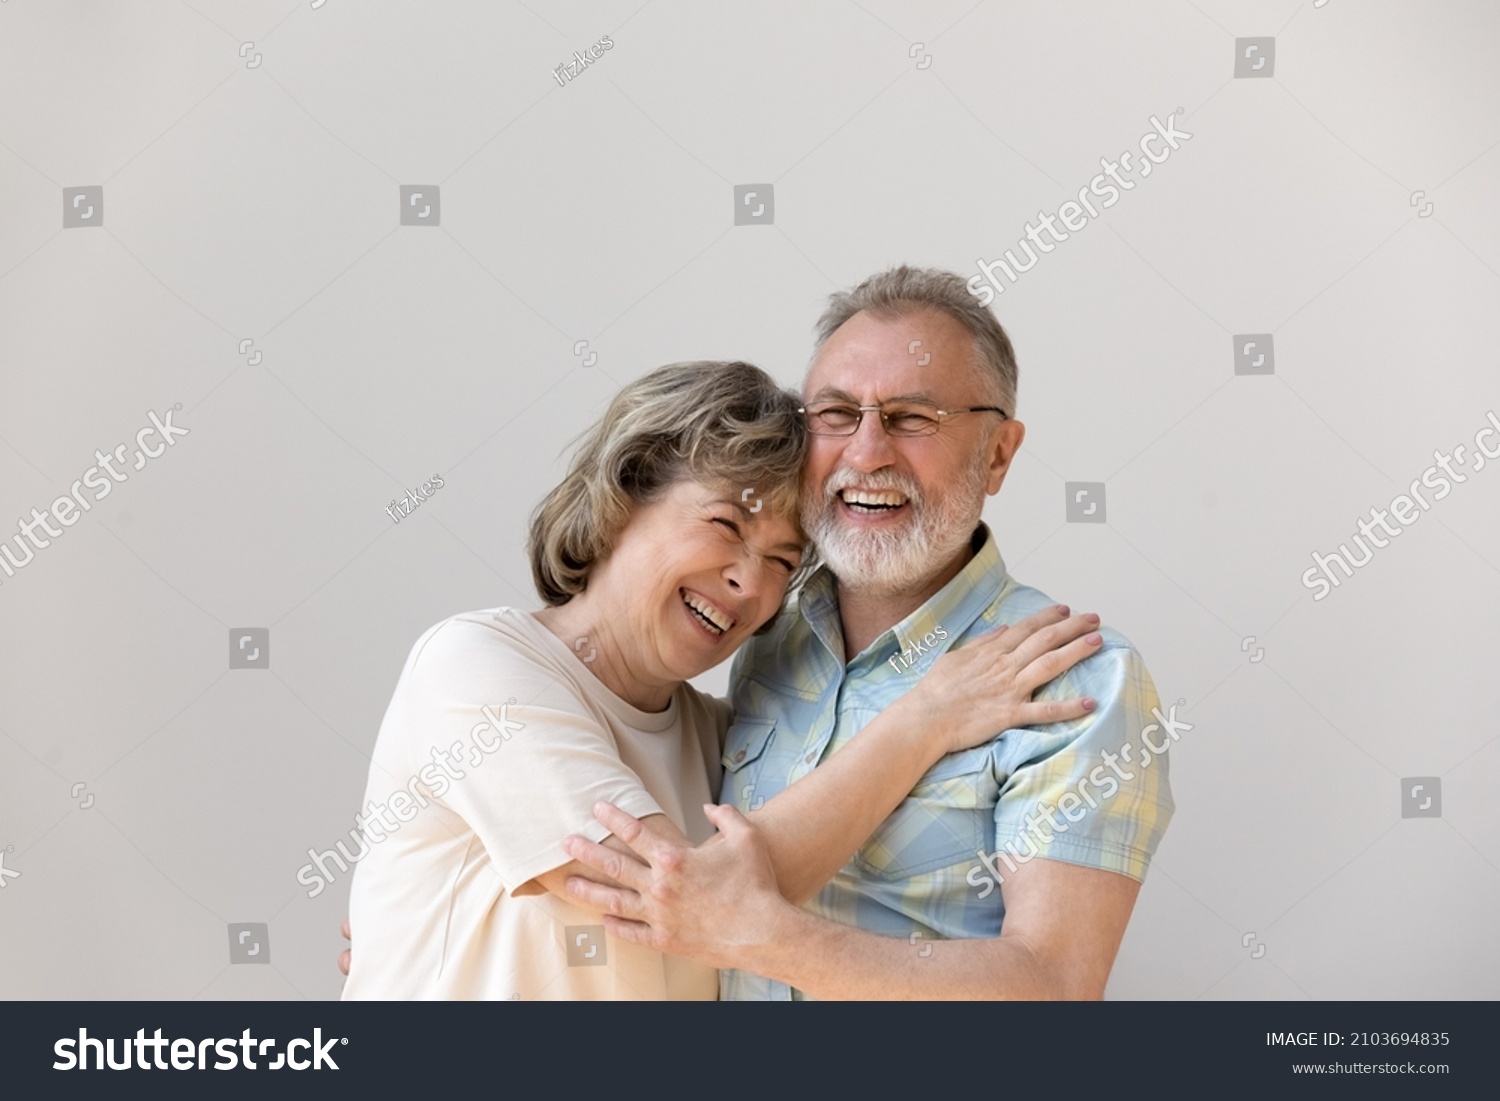 Sincere laughing bonding happy middle aged senior married couple cuddling, having fun enjoying communicating, isolated on white wall, showing candid loving feelings, good family relations concept. #2103694835